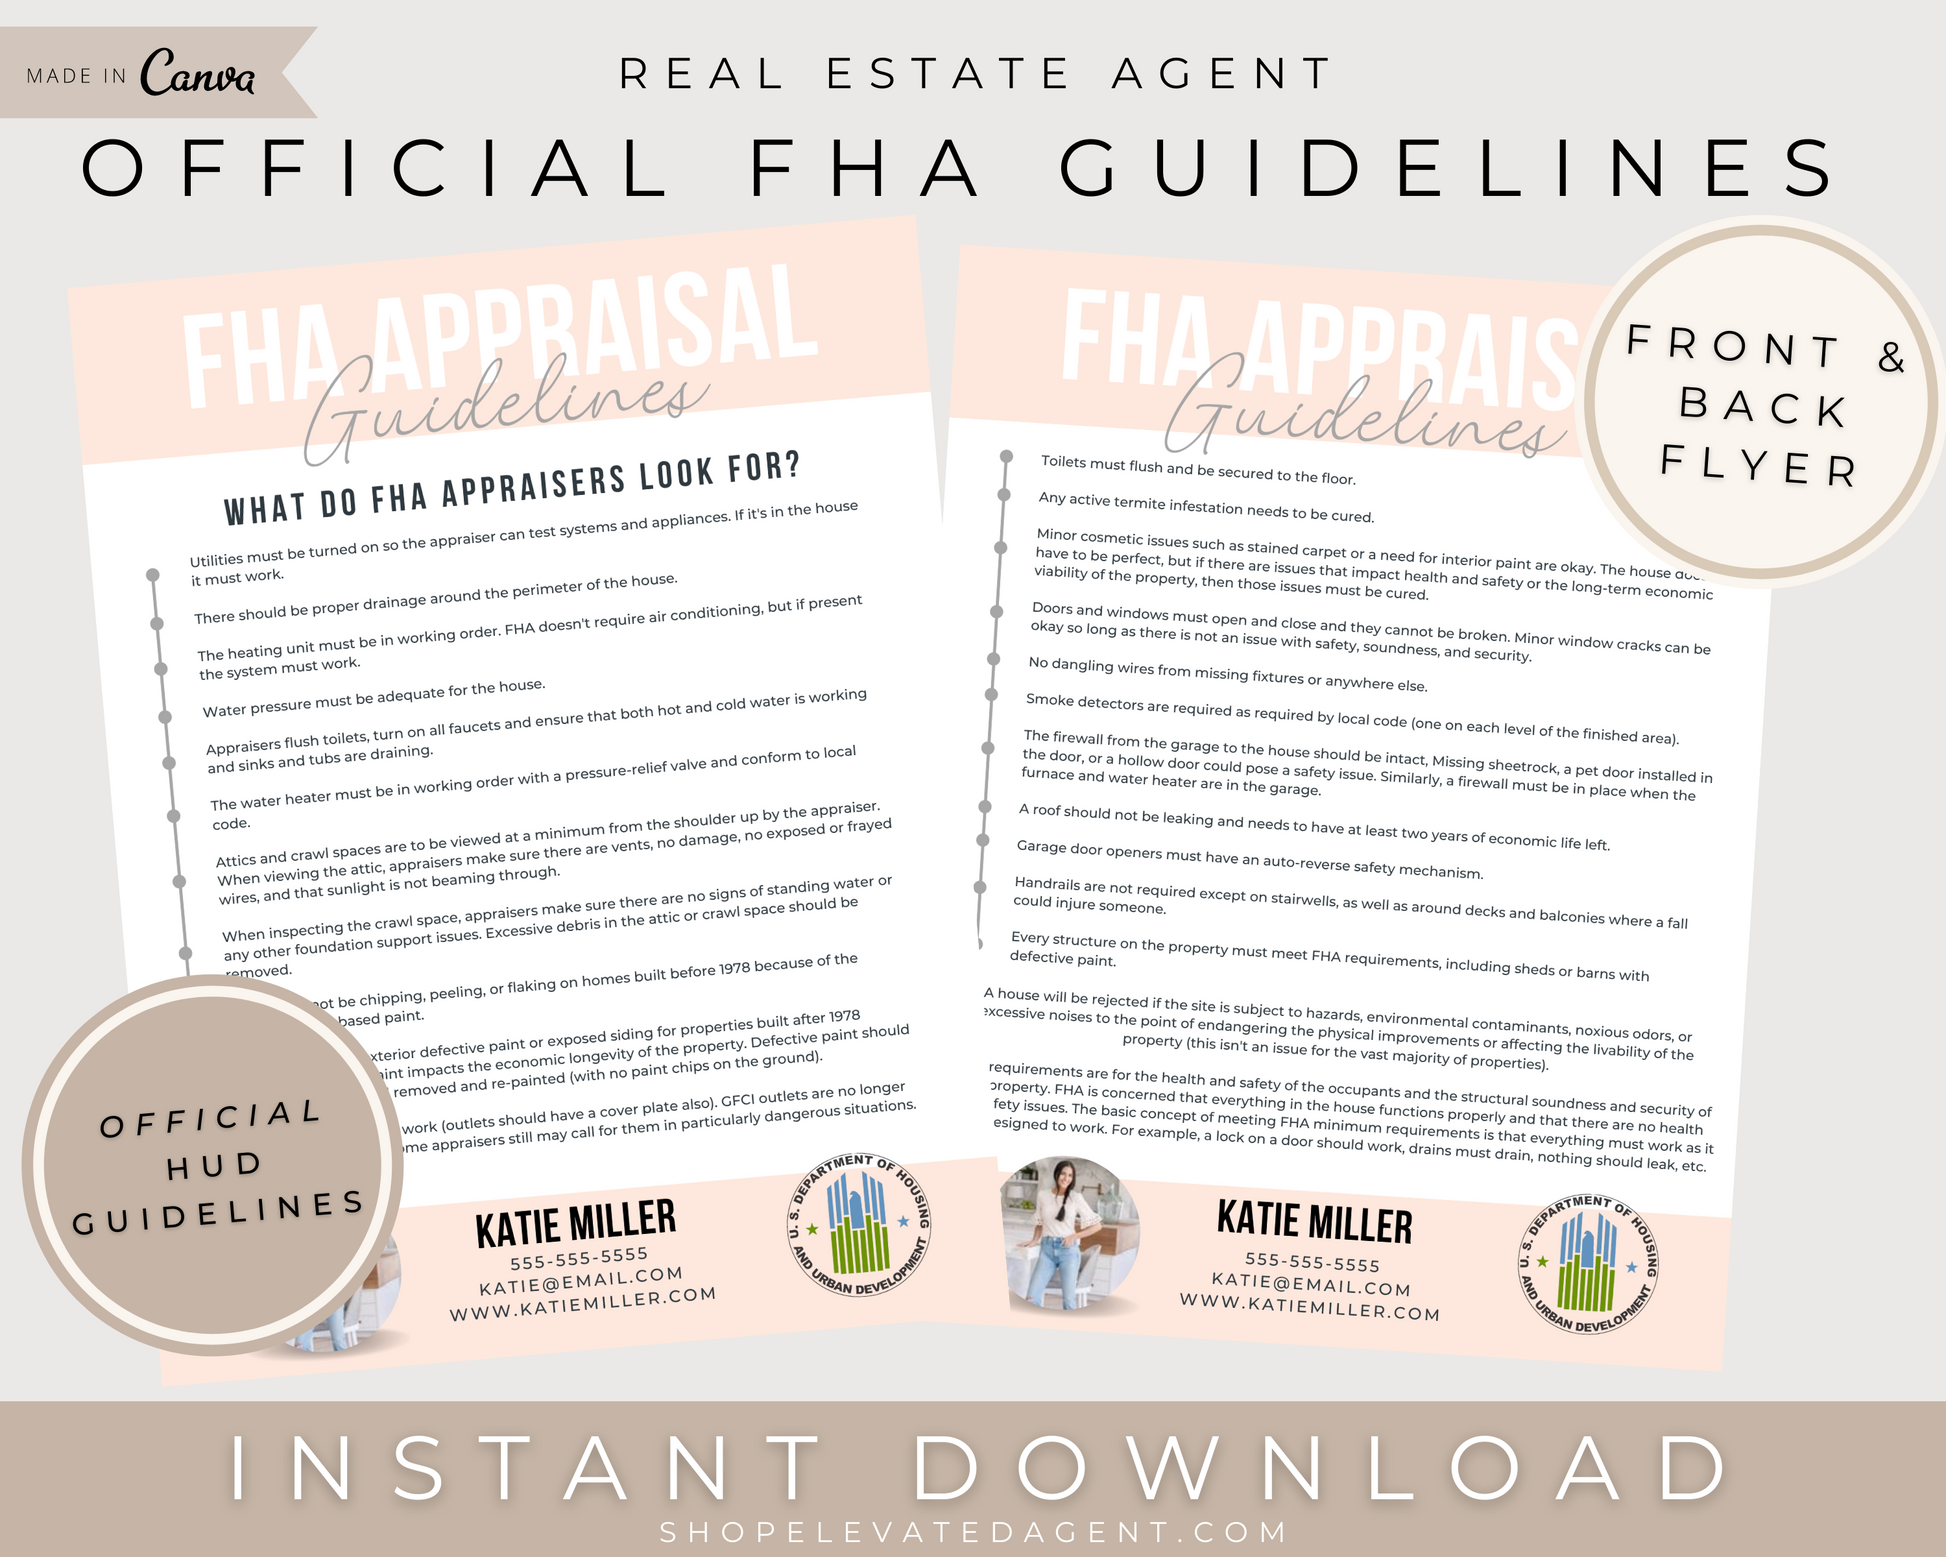 Official FHA Guidelines Flyer, Instant Download, Home Appraisal Handout for Real Estate Agents, Realtors, Home Buying, Home Selling, HUD Guidelines, Real Estate Marketing